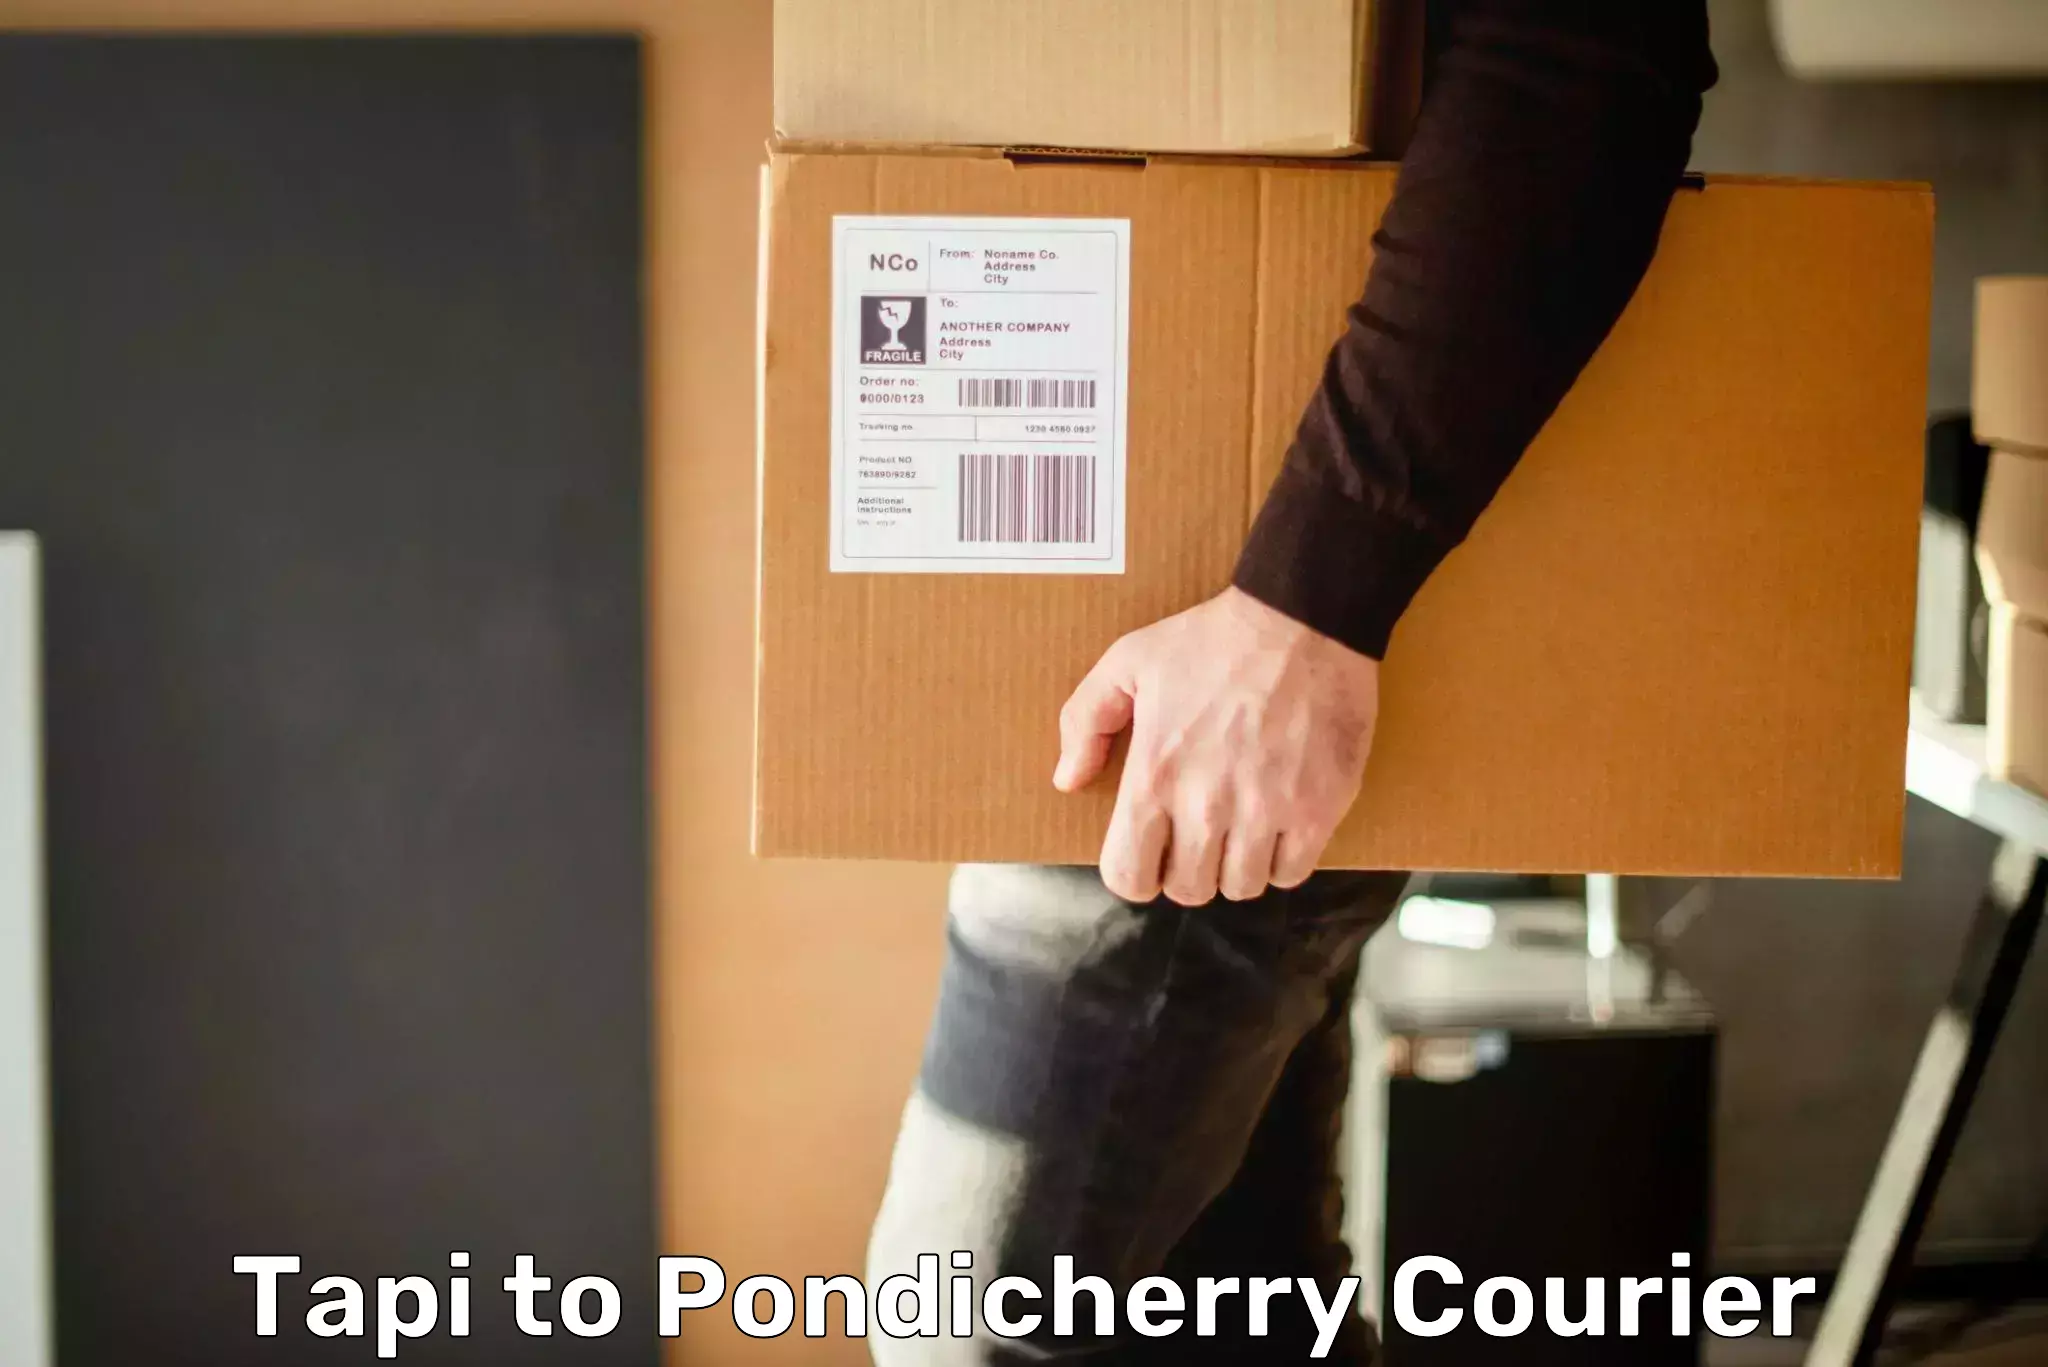 Package delivery network Tapi to Pondicherry University